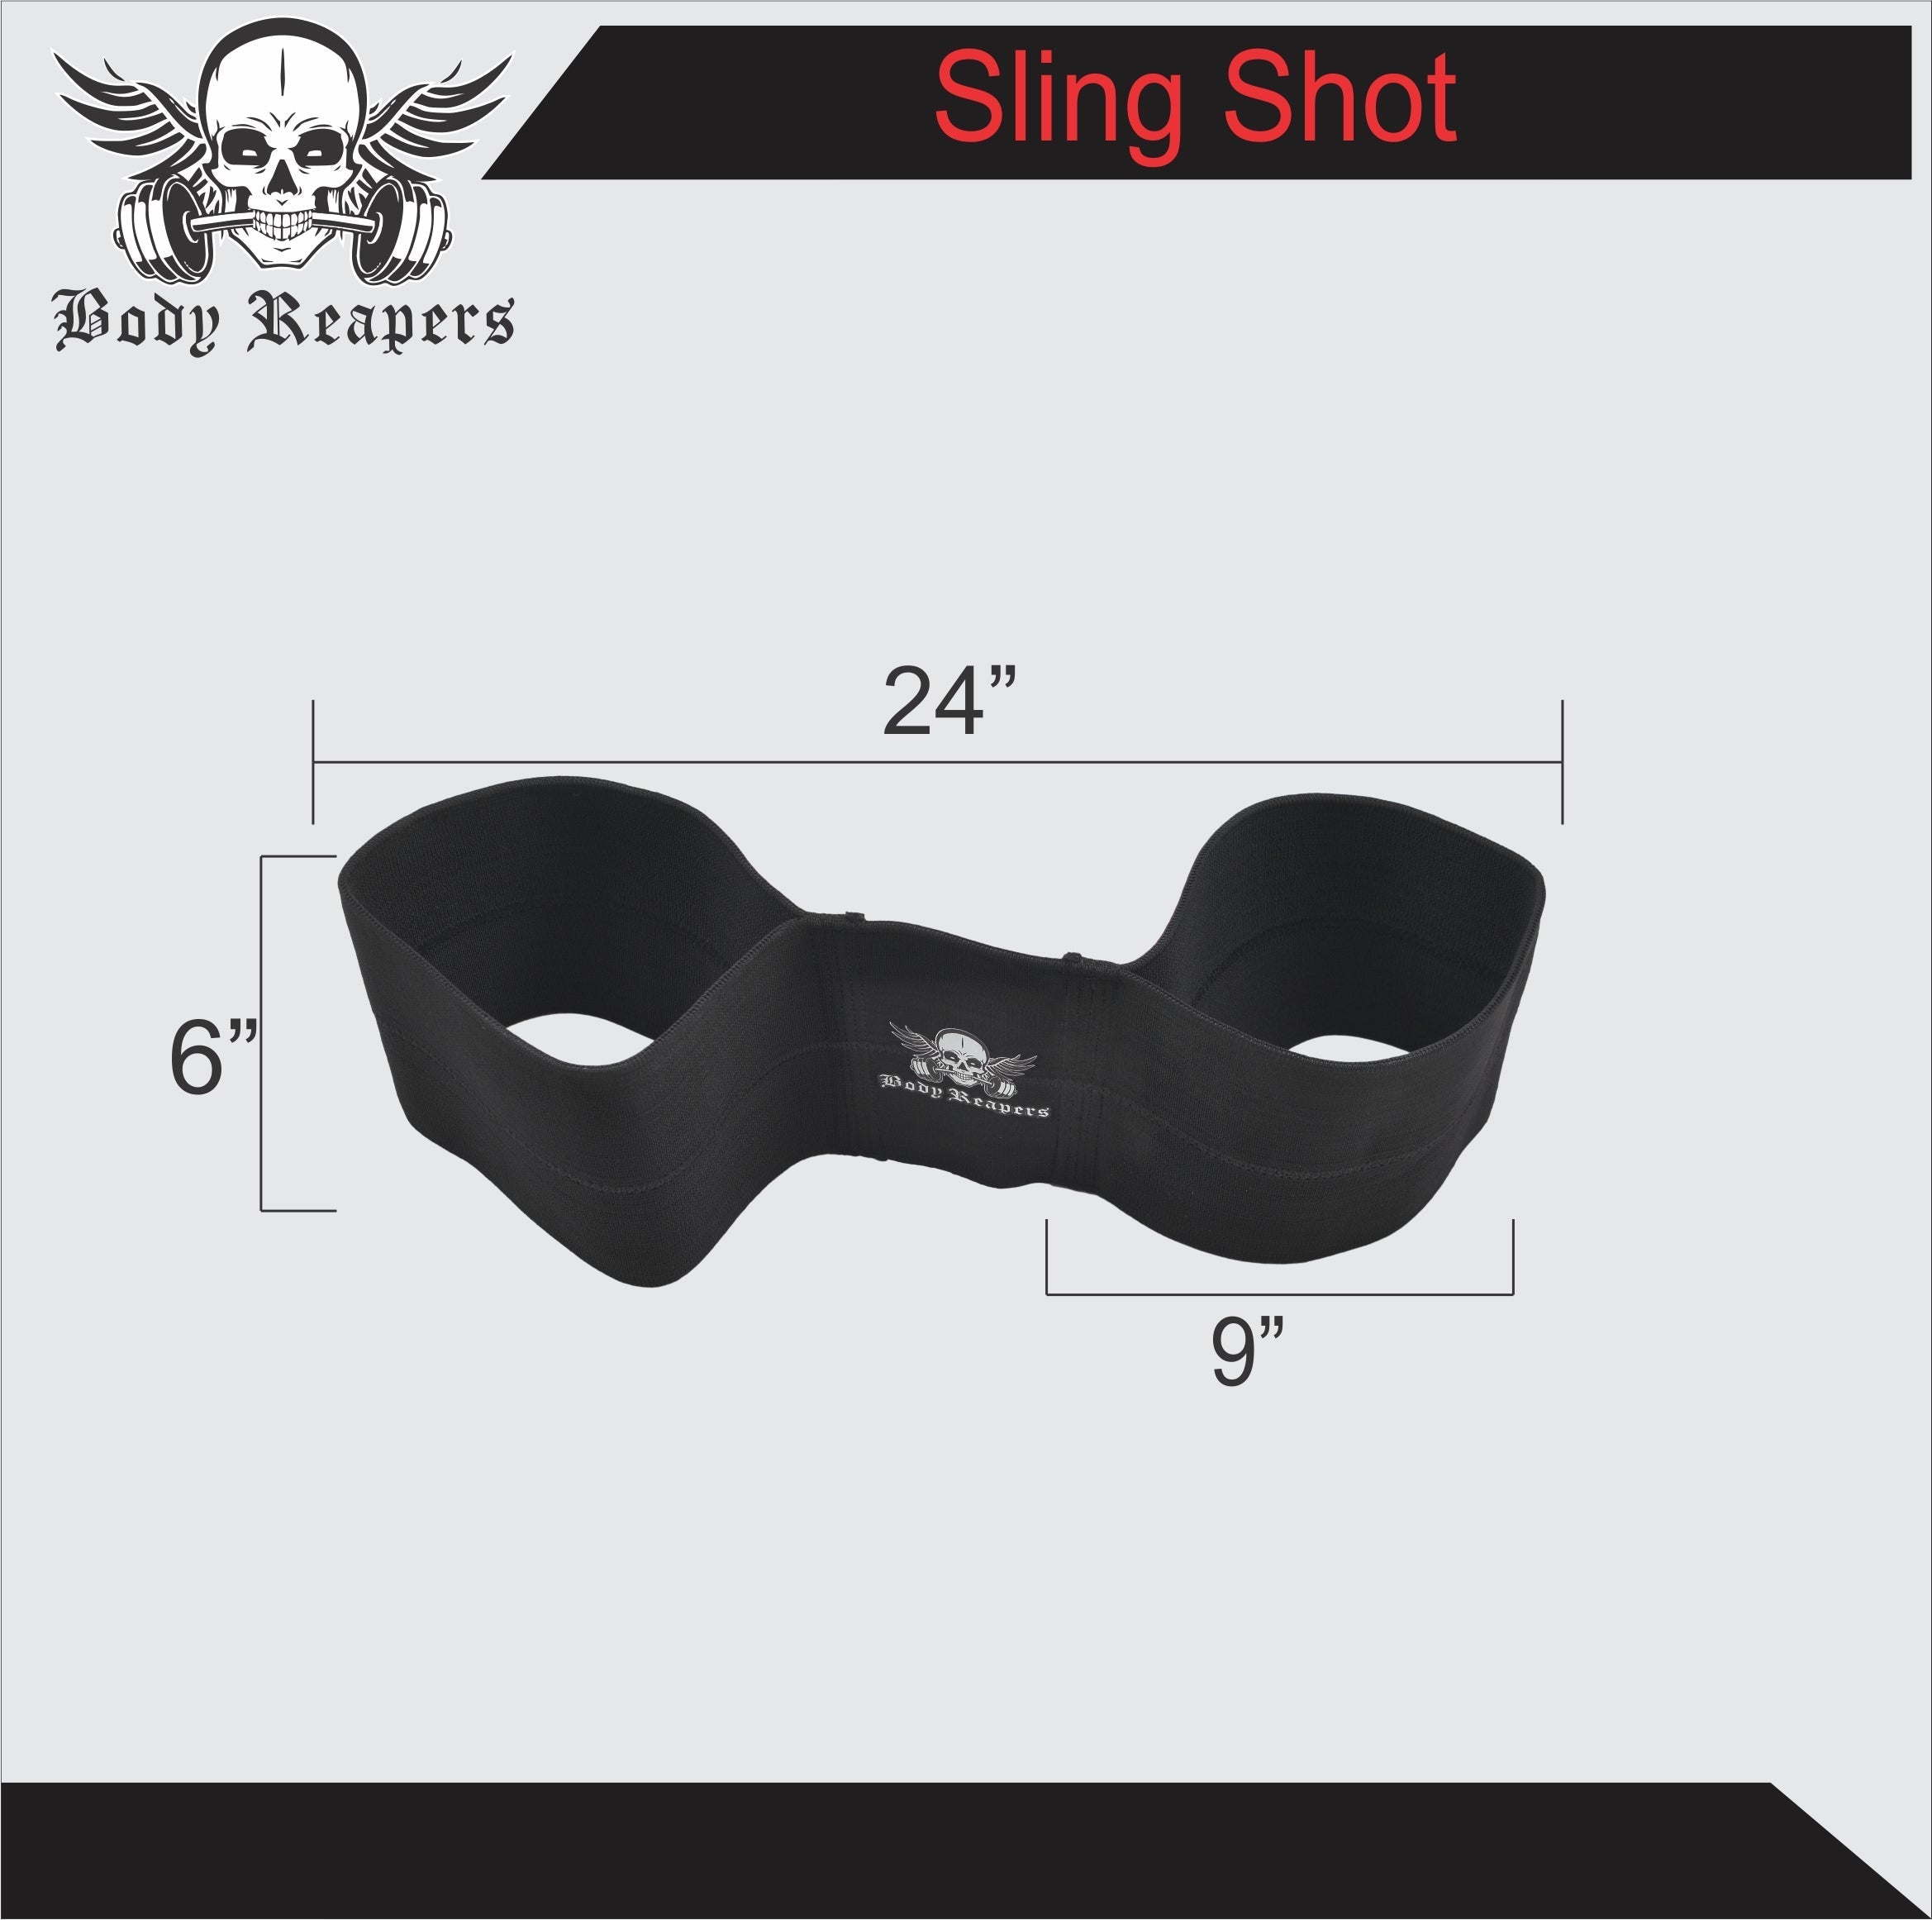 Body Reapers Bench Press Sling Shot